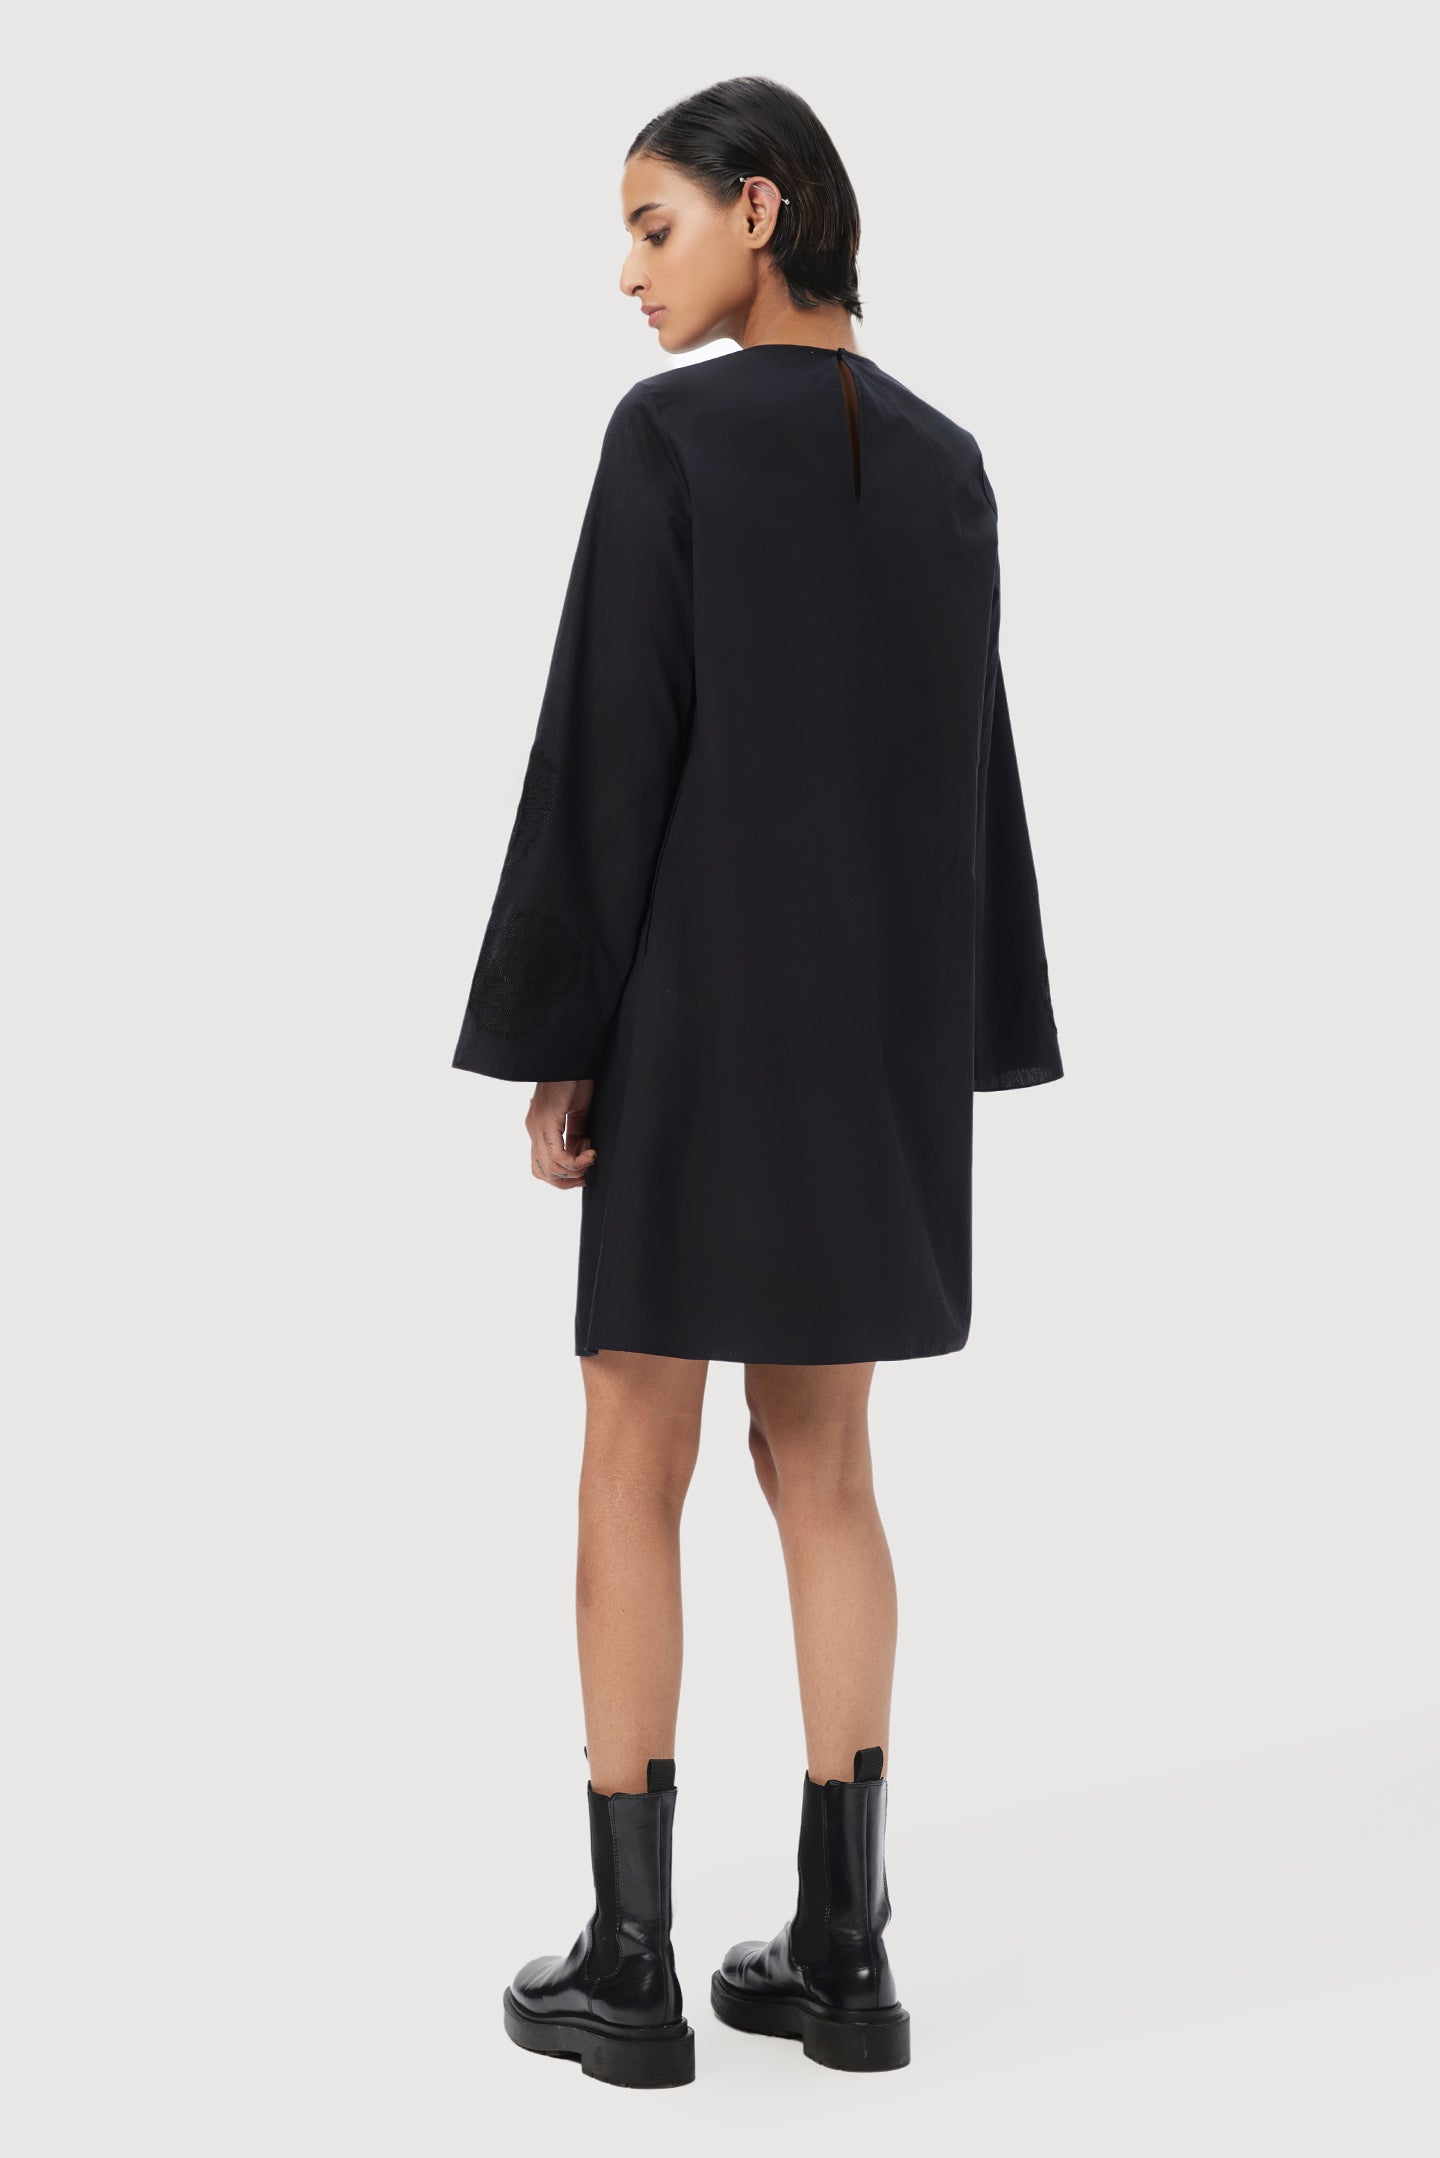 A-Line Deep Oval Neck Dress with Bell Sleeves